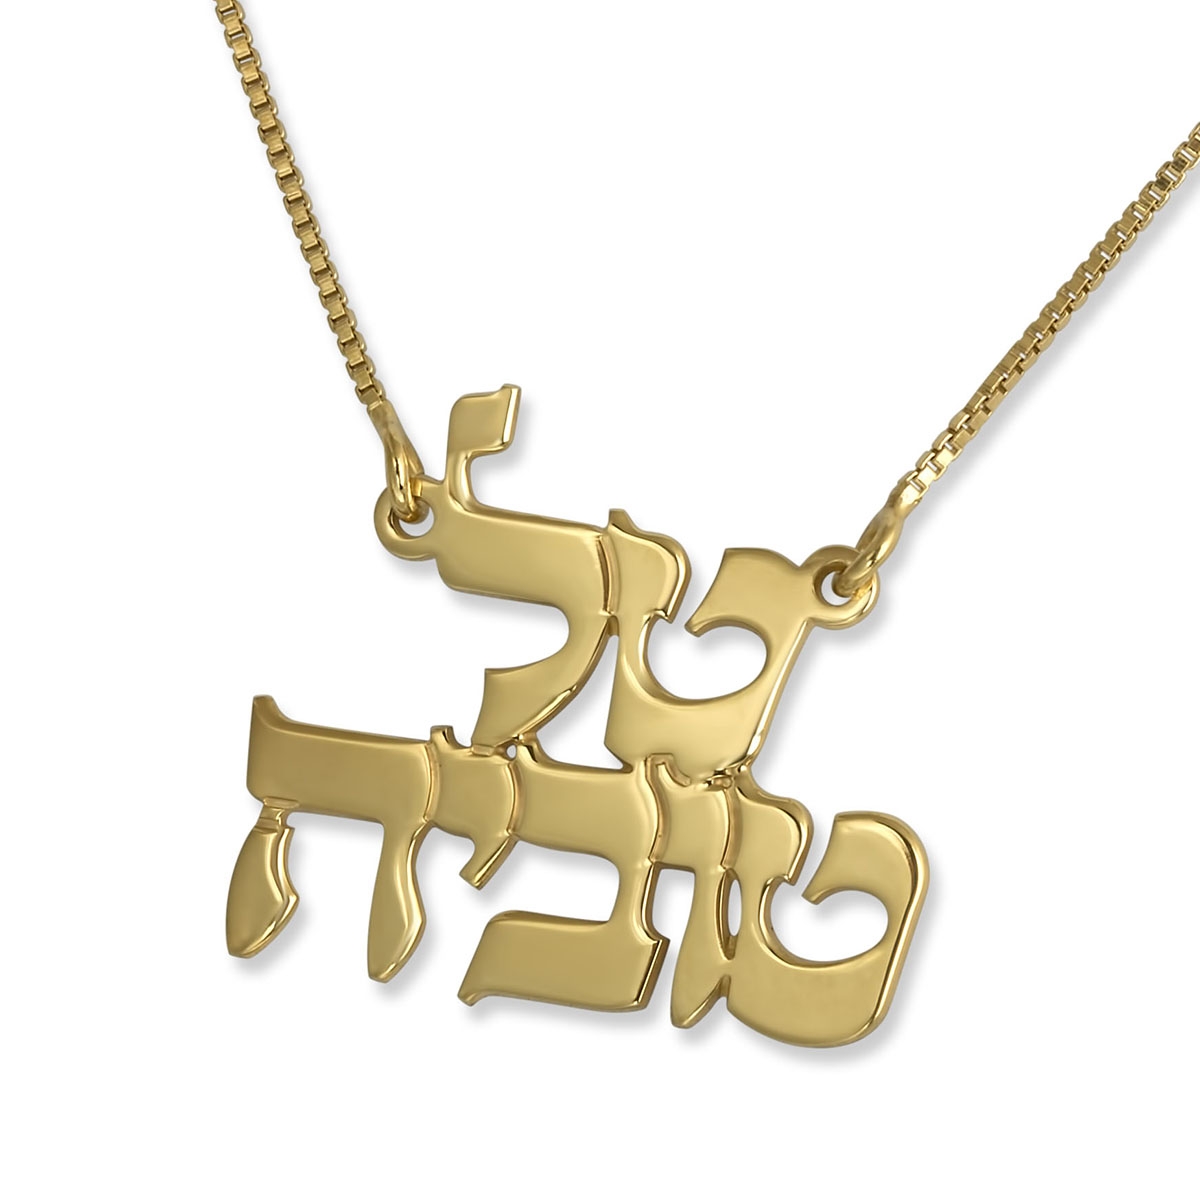 Our Top Hebrew Name Jewelry from Israel